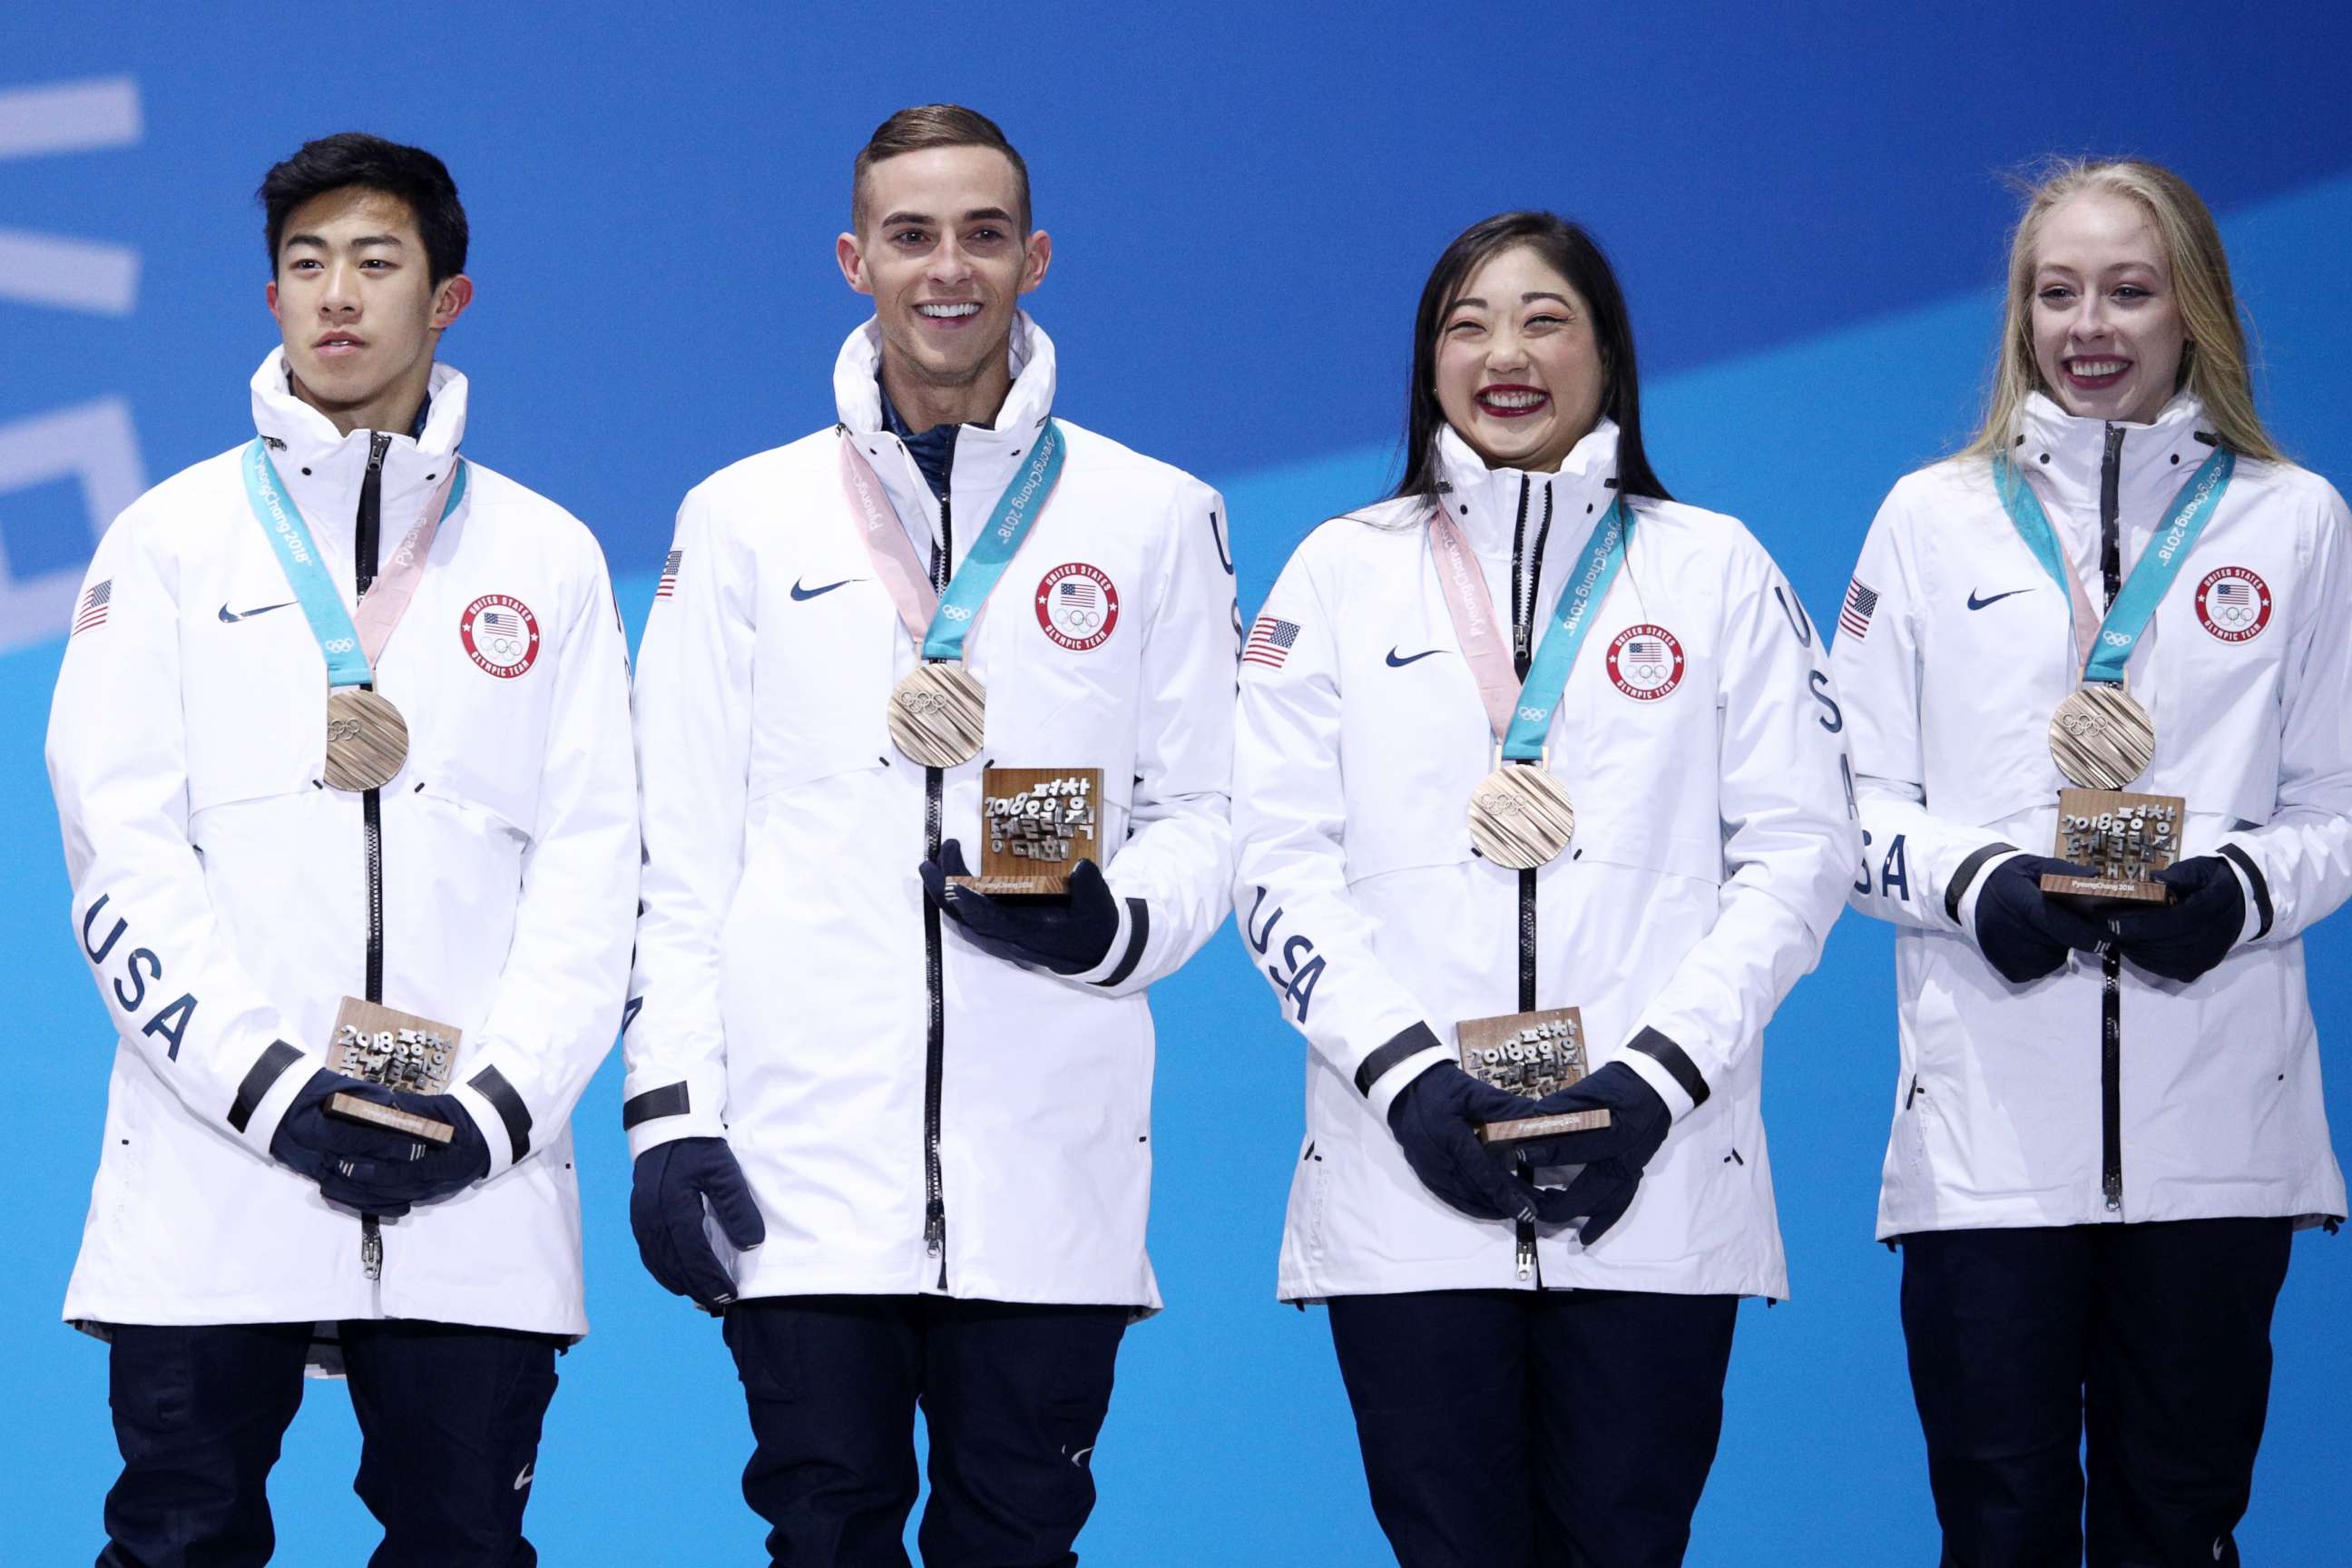 PHOTO: (L-R) Bronze medalists Nathan Chen, Adam Rippon, Mirai Nagasu and Bradie Tennell of team U.S. celebrate during the medal ceremony after the figure skating team event at Medal Plaza, Feb. 12, 2018, in Pyeongchang, South Korea.